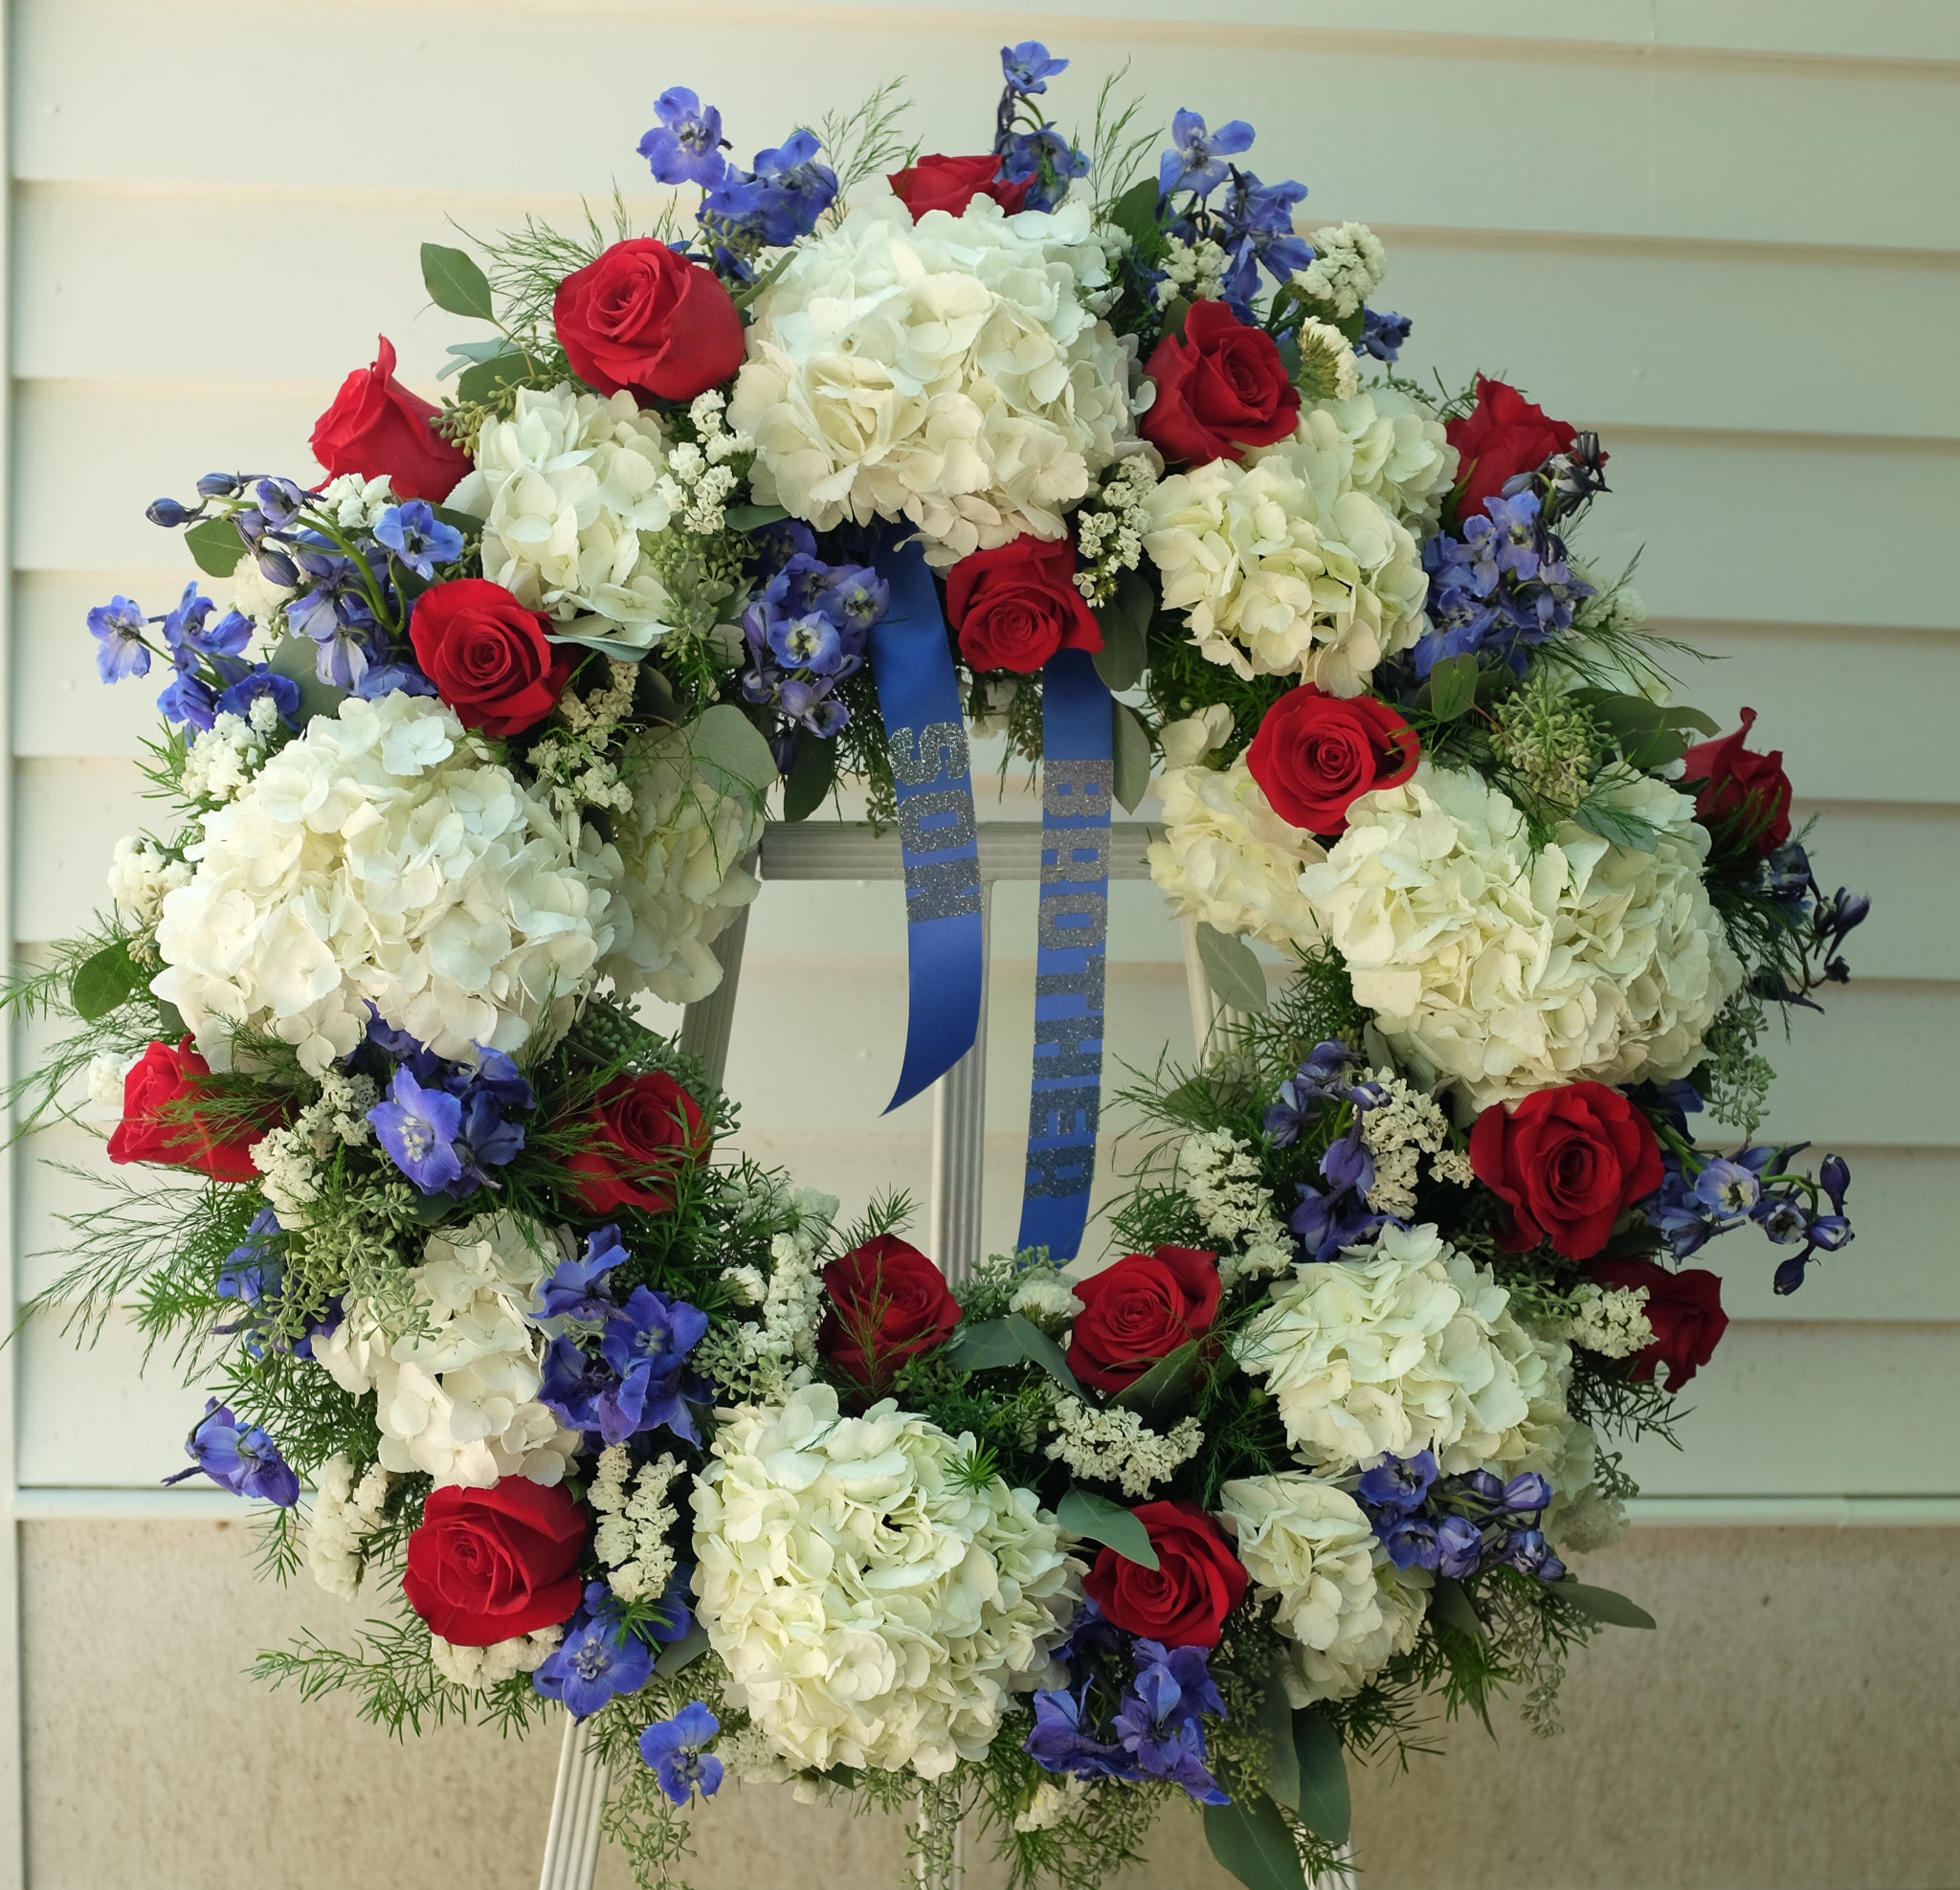 Floral Arrangment by Michler's Florist with white hydrangea, red roses, and blue delphinium